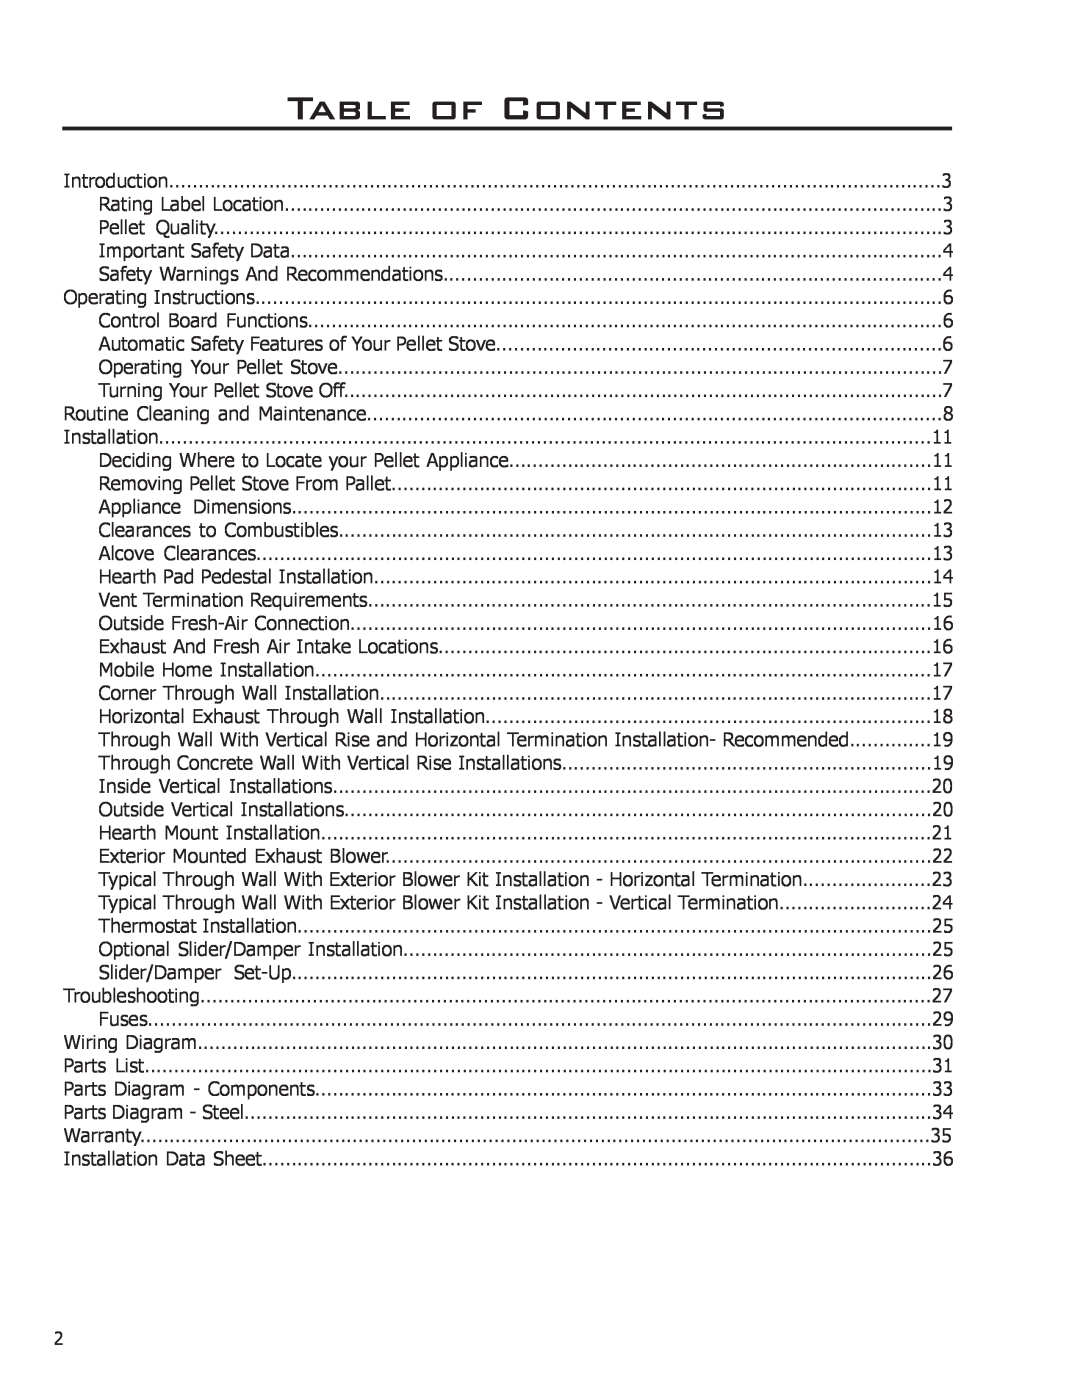 Enviro C-11023 owner manual Table of Contents 